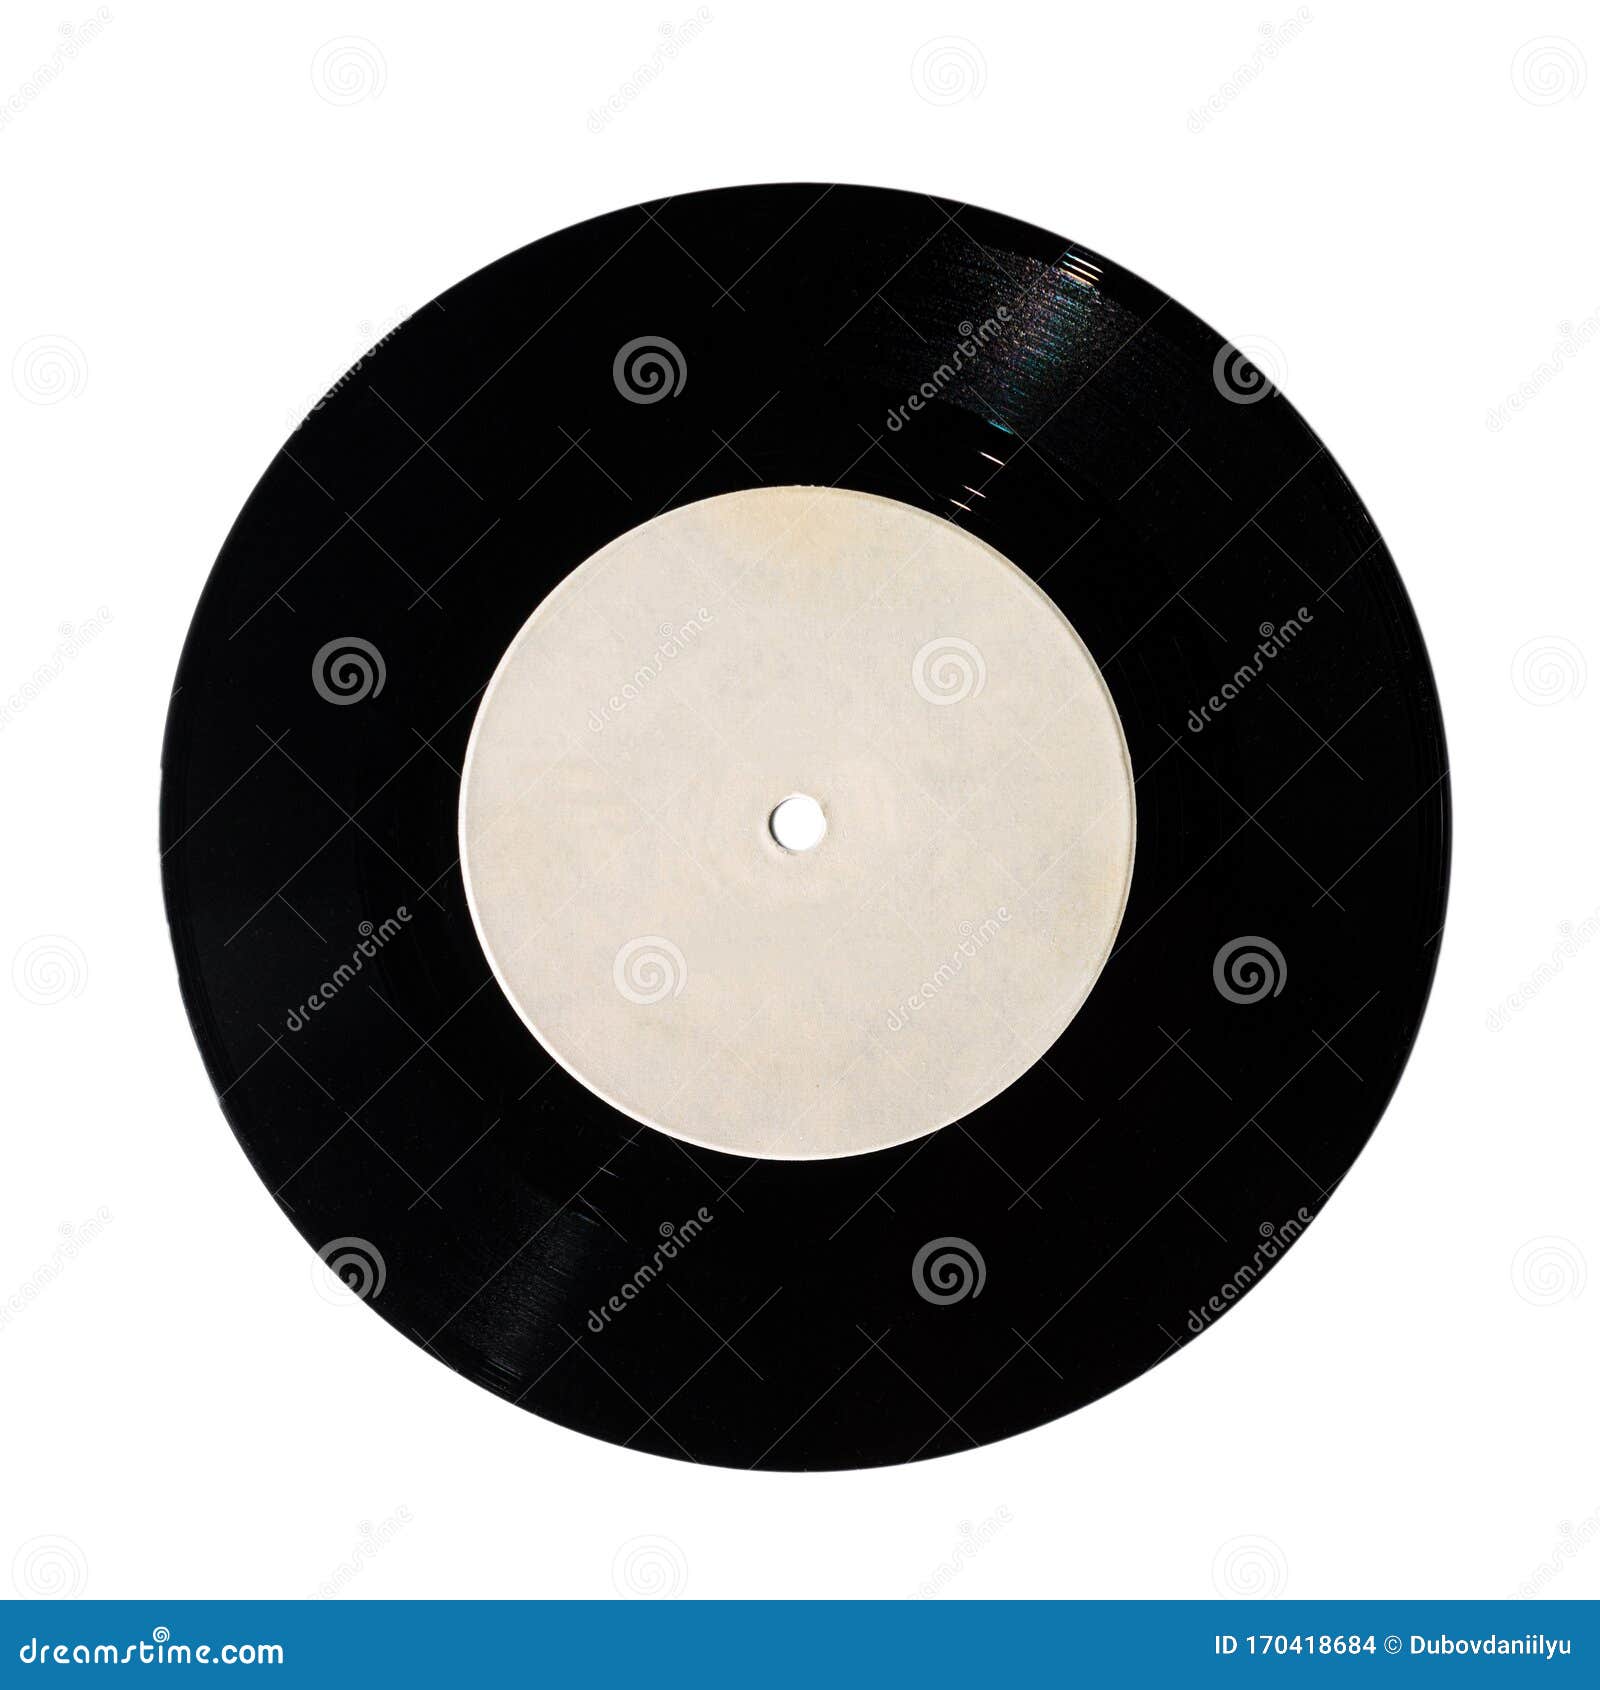 Vintage old music record, vinyl record with pure label isolated on white background, copy space, mock up